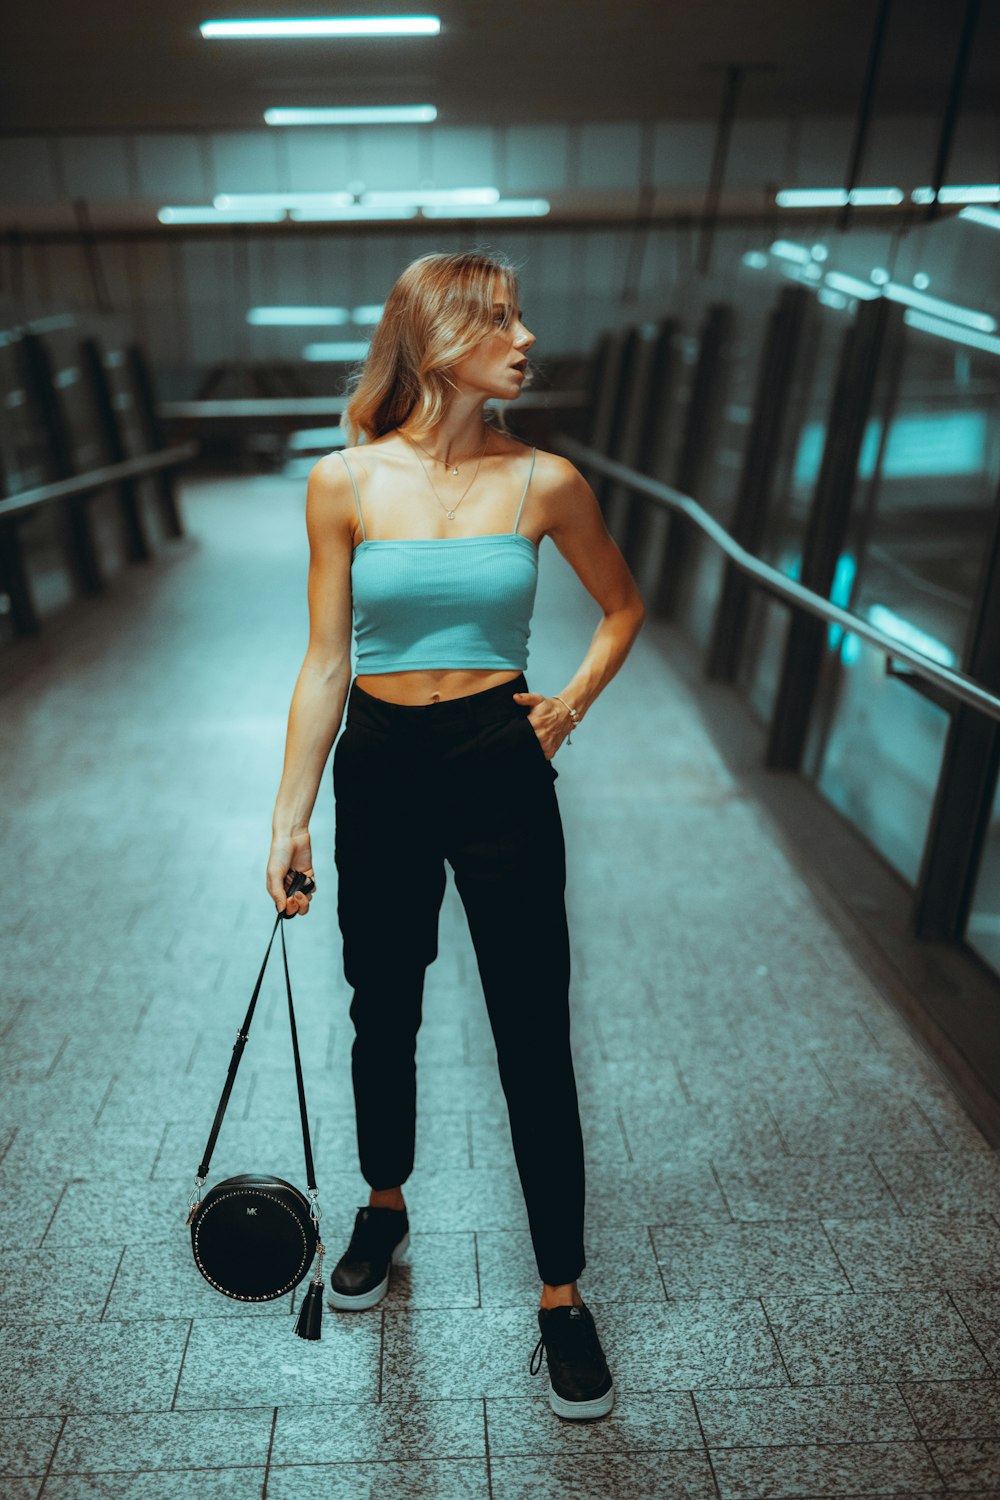 woman in white tank top and black pants standing on hallway